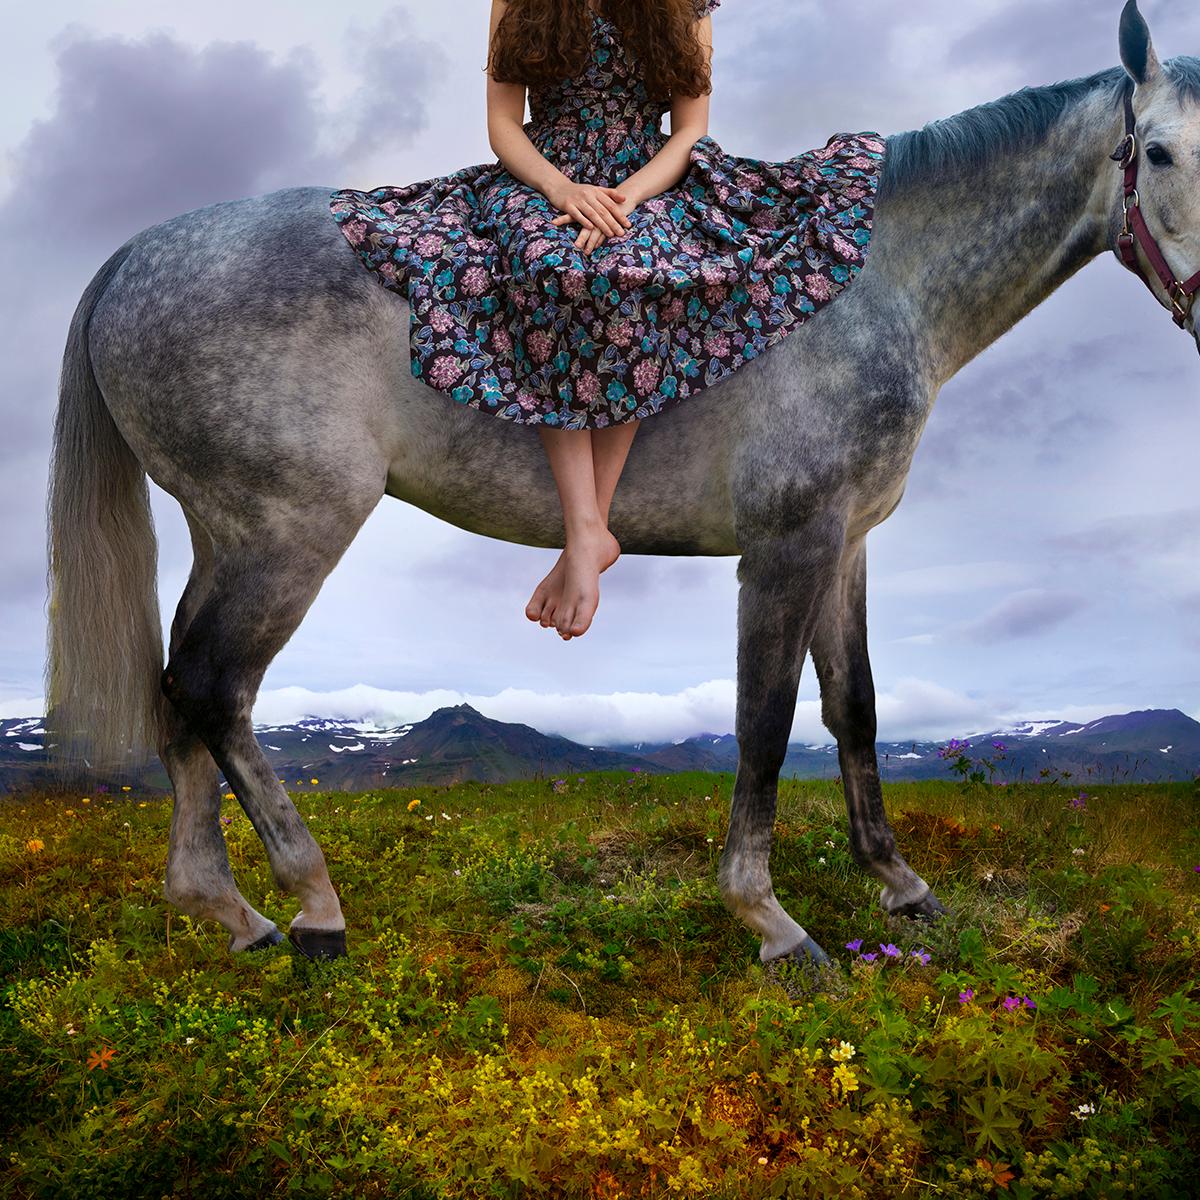 Tom Chambers Figurative Photograph - Steady My Steed, limited edition photograph, archival, signed and numbered 